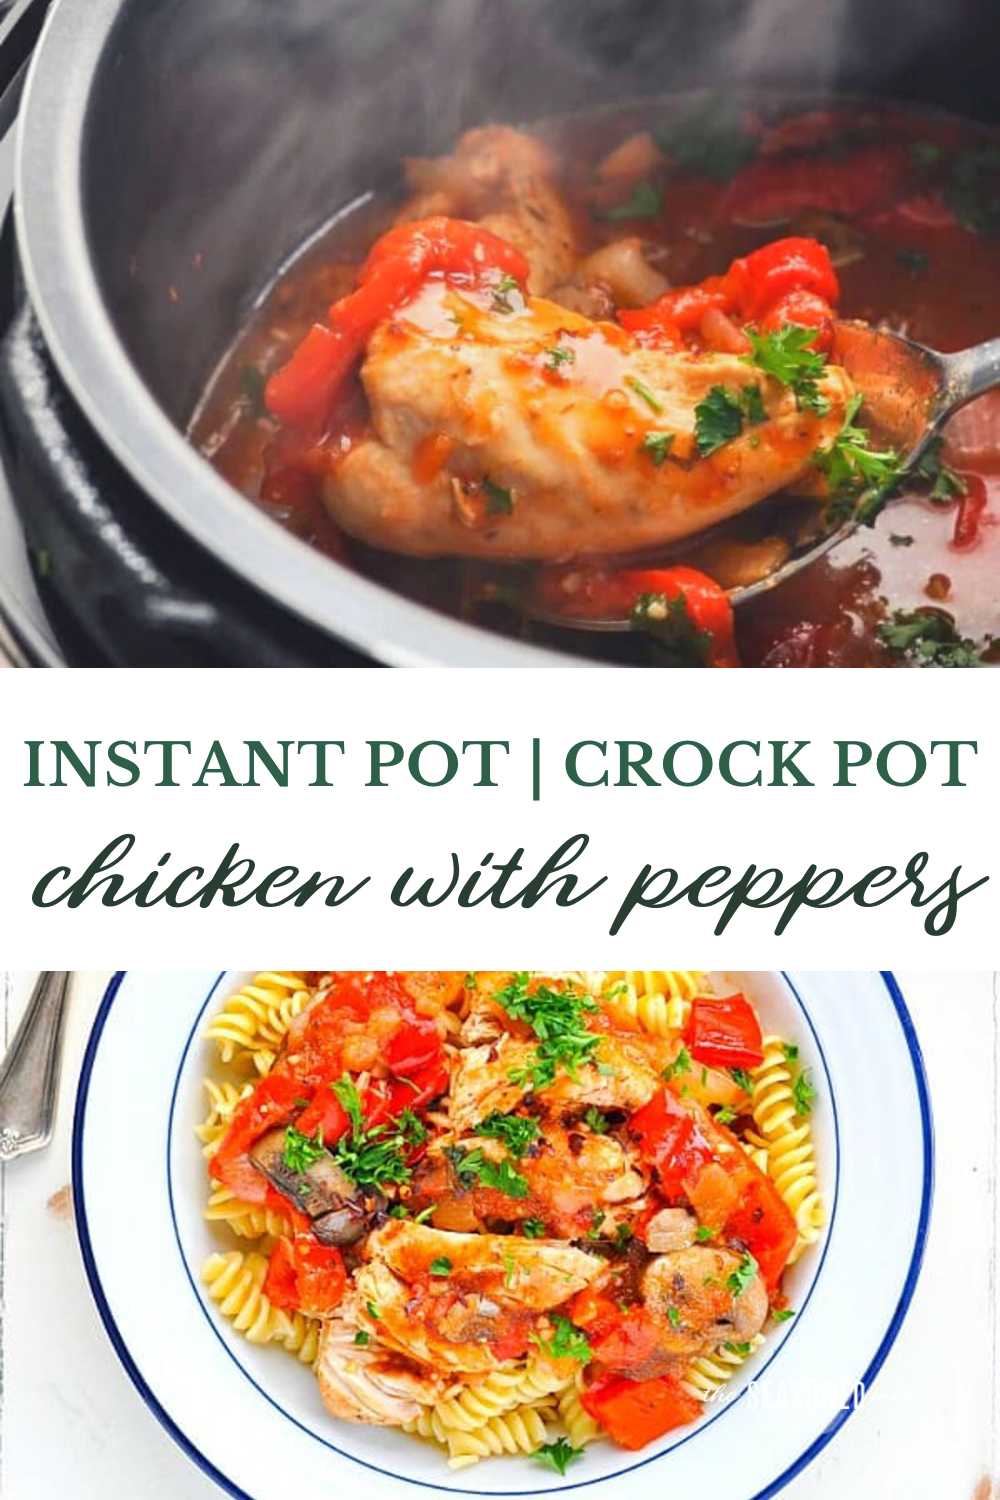 Chicken with Peppers (Slow Cooker or Instant Pot) - The Seasoned Mom